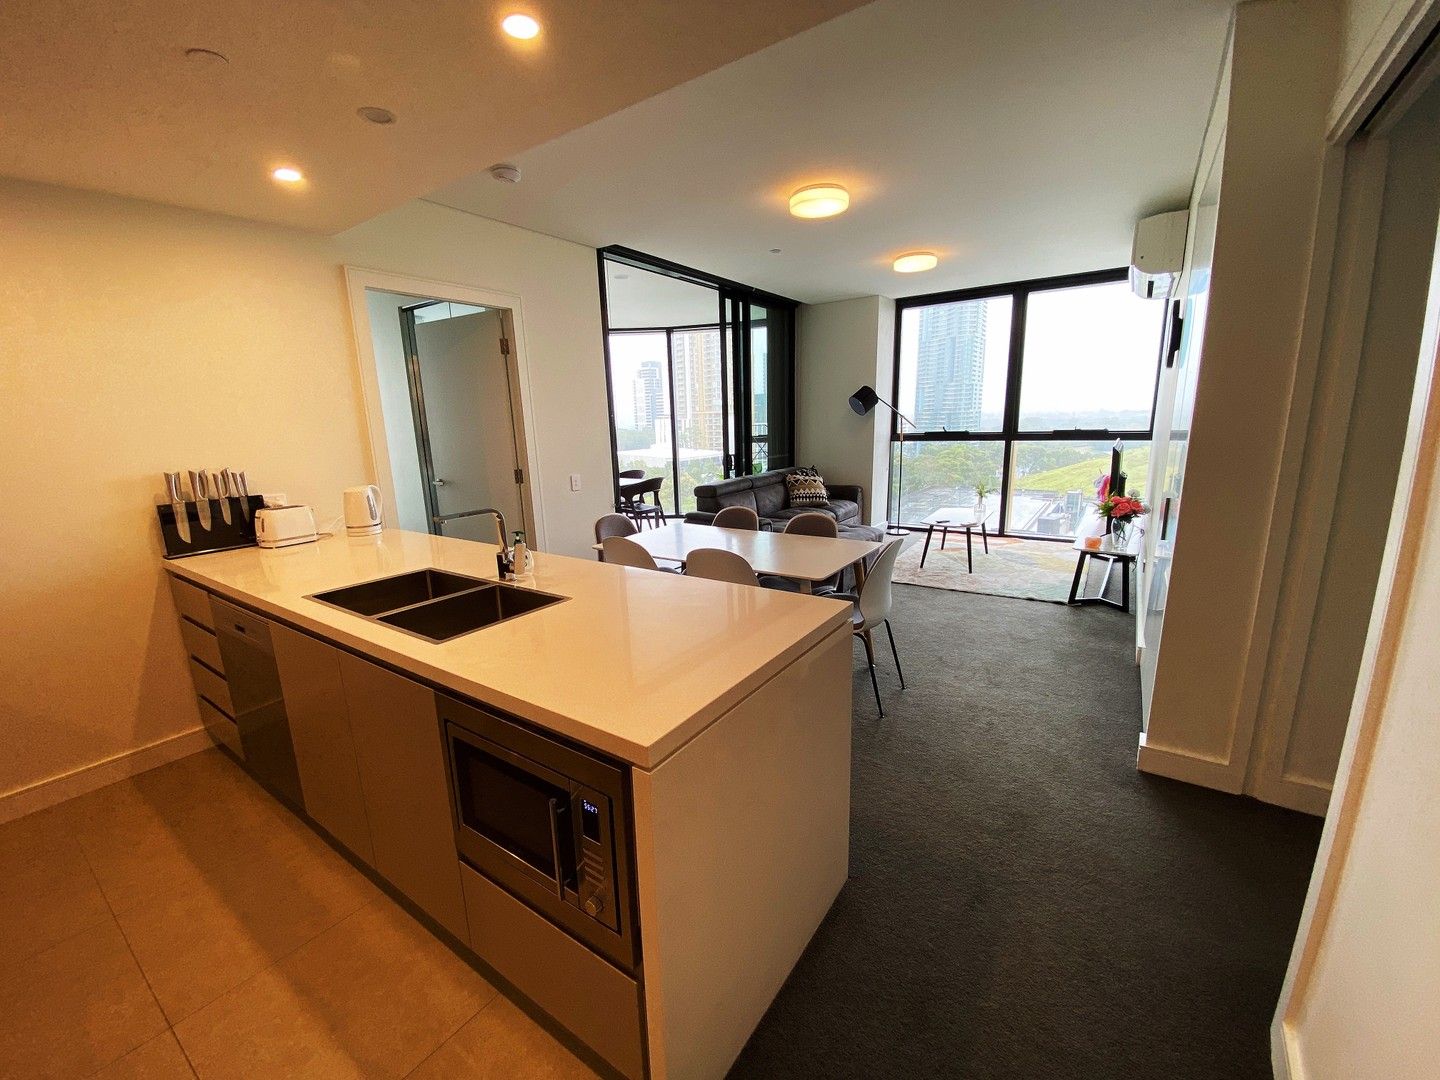 2 bedrooms Apartment / Unit / Flat in 1004/3 Olympic Boulevard SYDNEY OLYMPIC PARK NSW, 2127